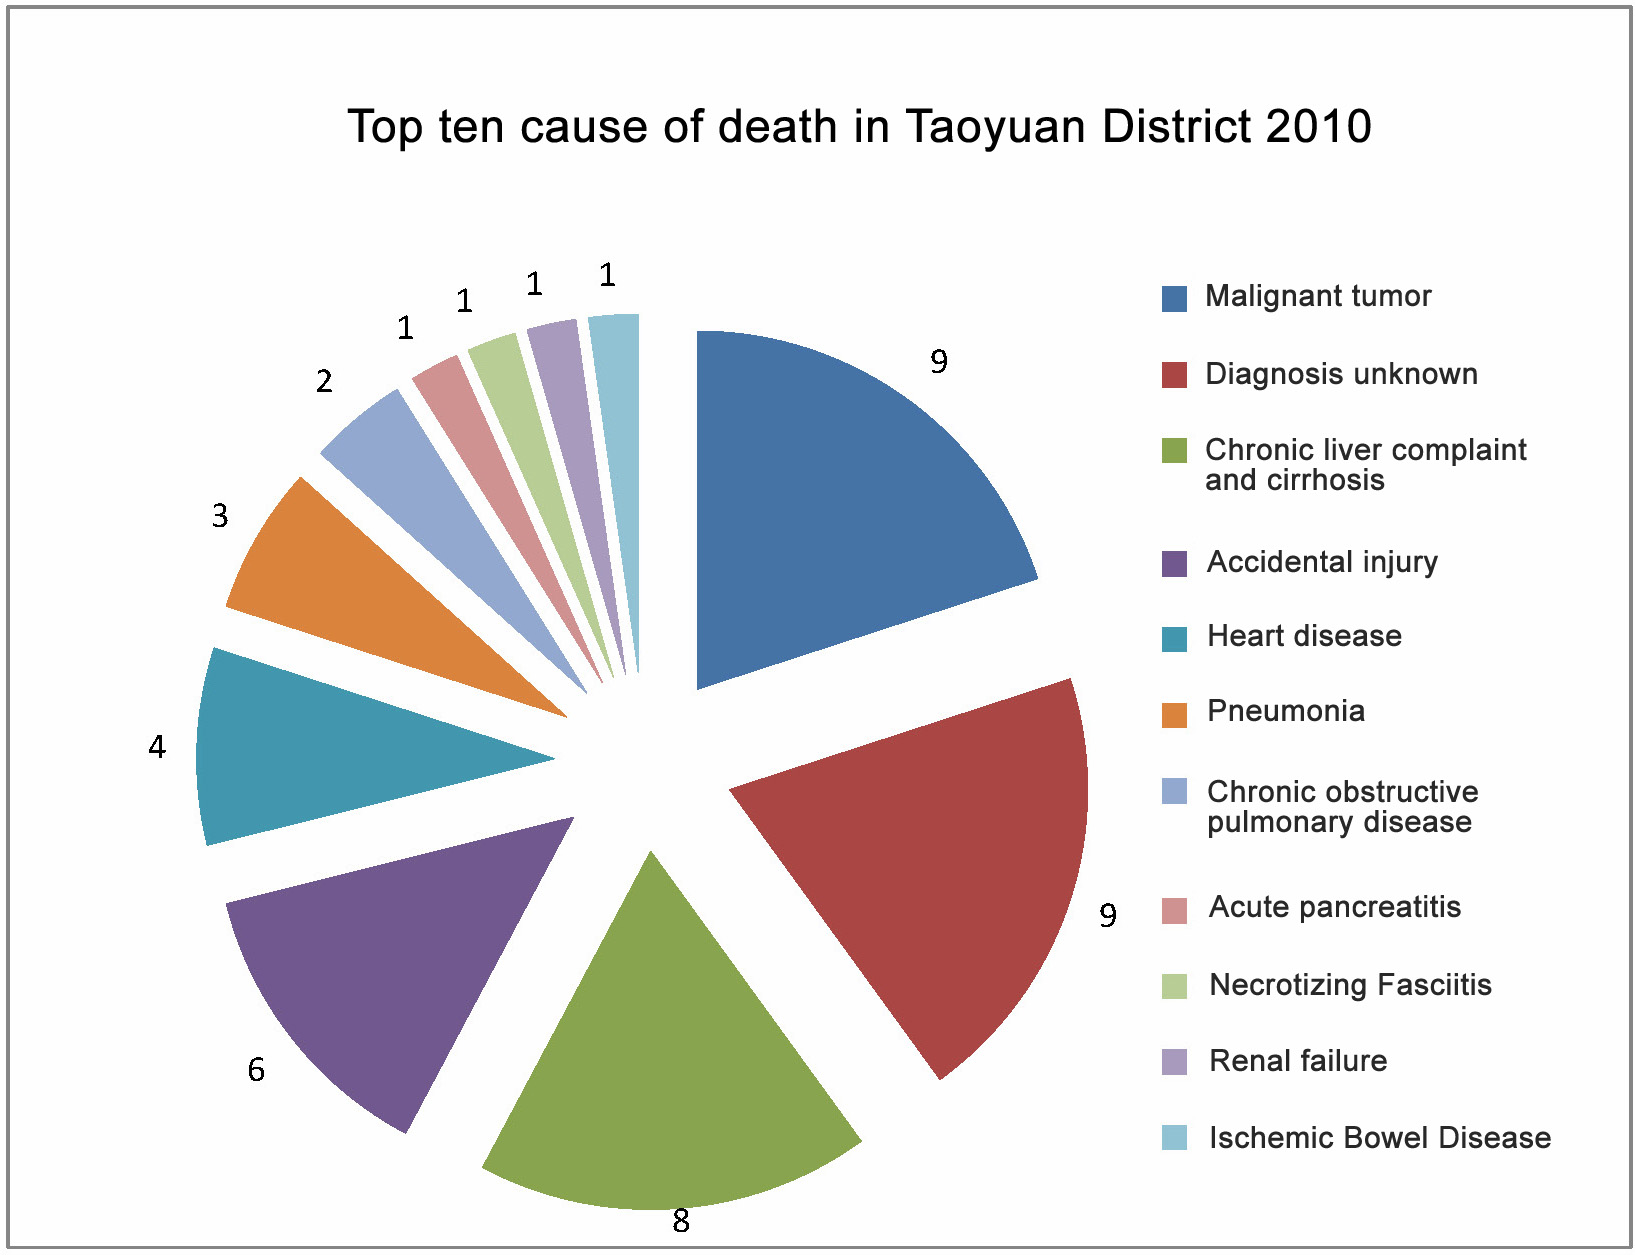 Top ten cause of death in Taoyuan District 2010